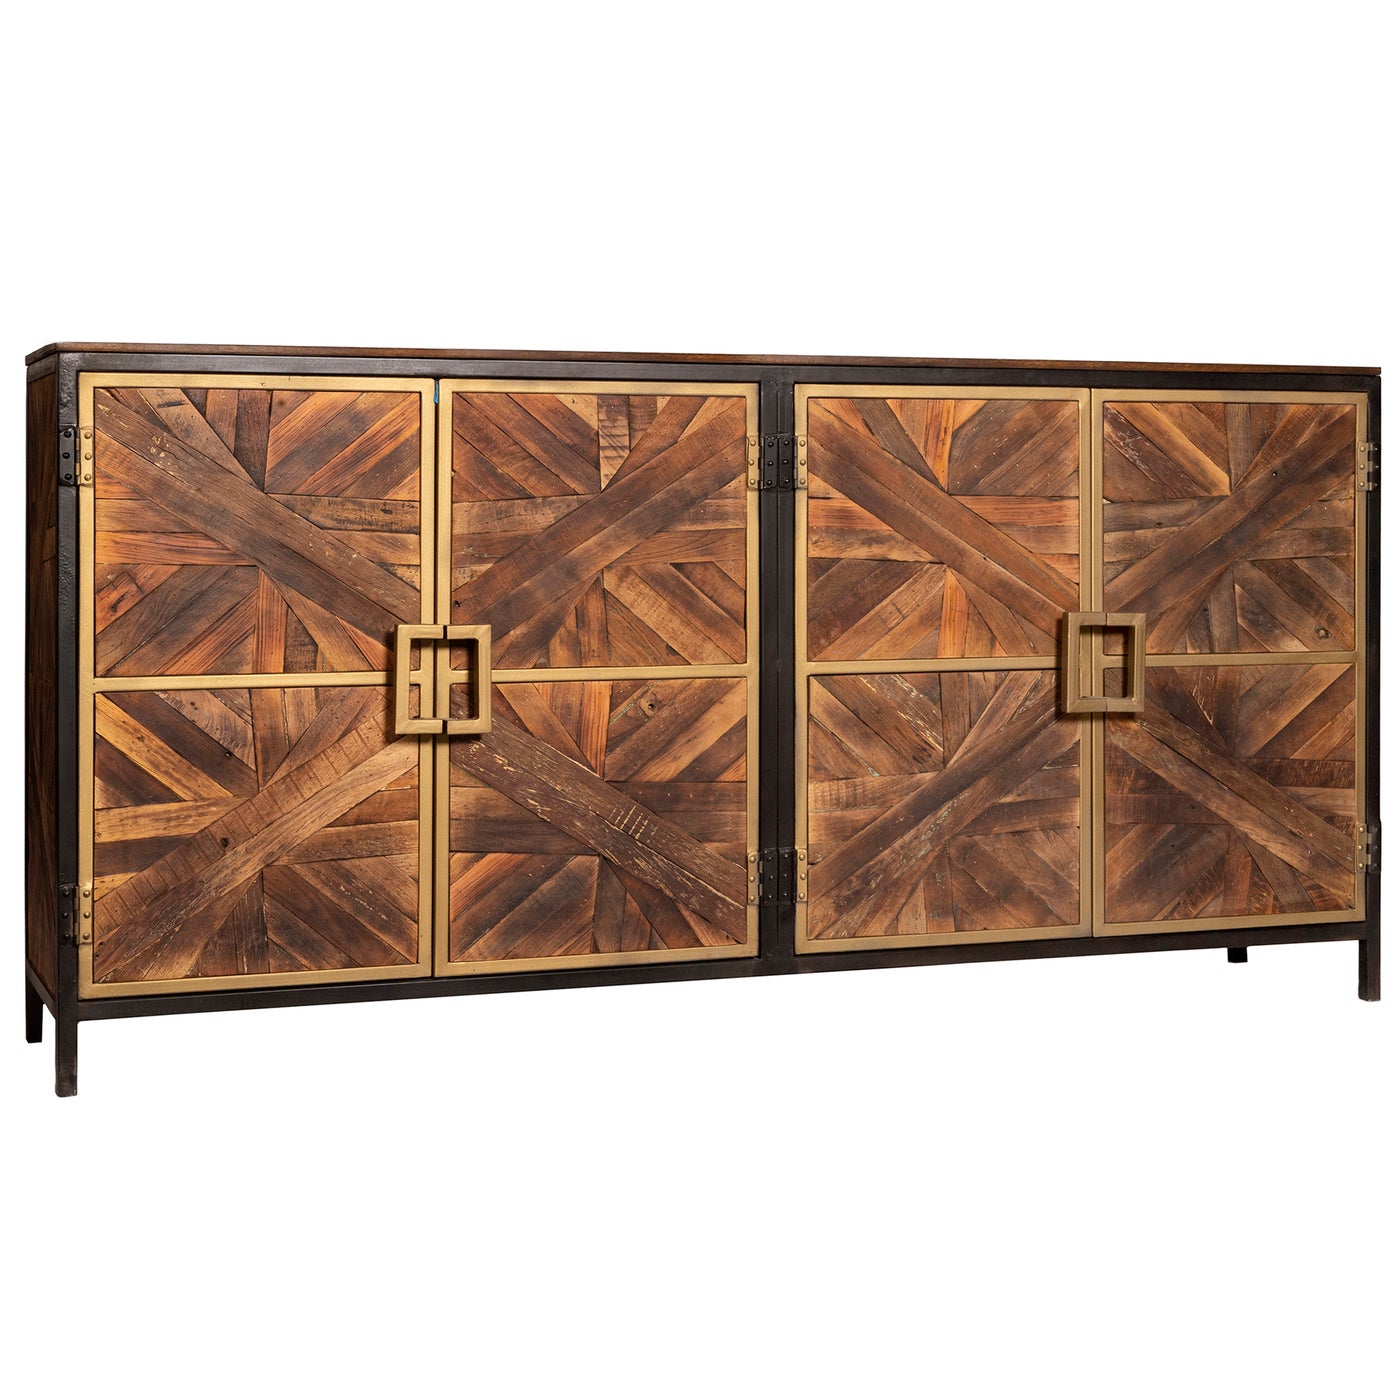 ATHENS SIDEBOARD | Reclaimed Walnut Finish on Mango Wood with Black and Gold Finish on Metal Frame |